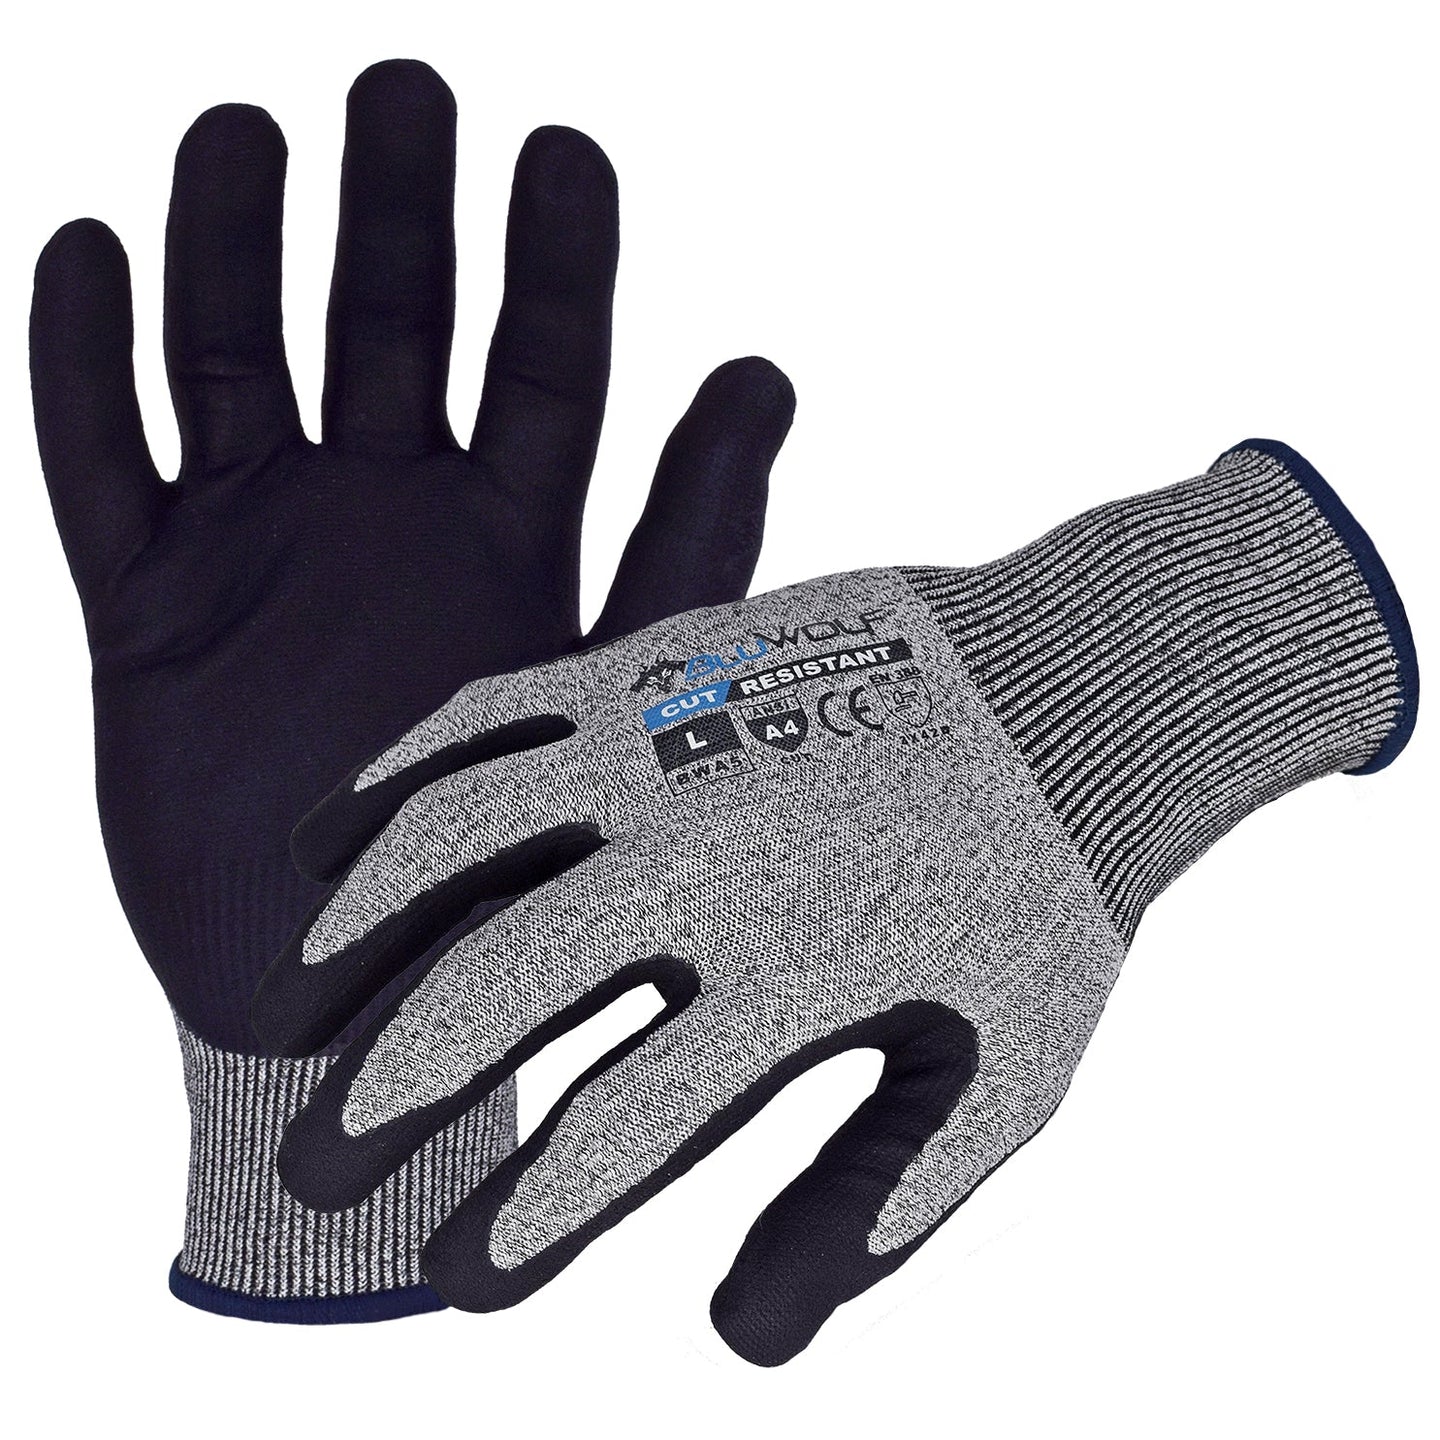 BluWolf(BW4040) Cut Resistant Work Gloves, 18-Gauge Gray Seamless ANSI A4 Cut Resistant Gloves w/ Black Ultra-Thin Micro-Foam Nitrile/Polyurethane Palm/Finger Coating, 2X-Large, Case of 12 Pairs